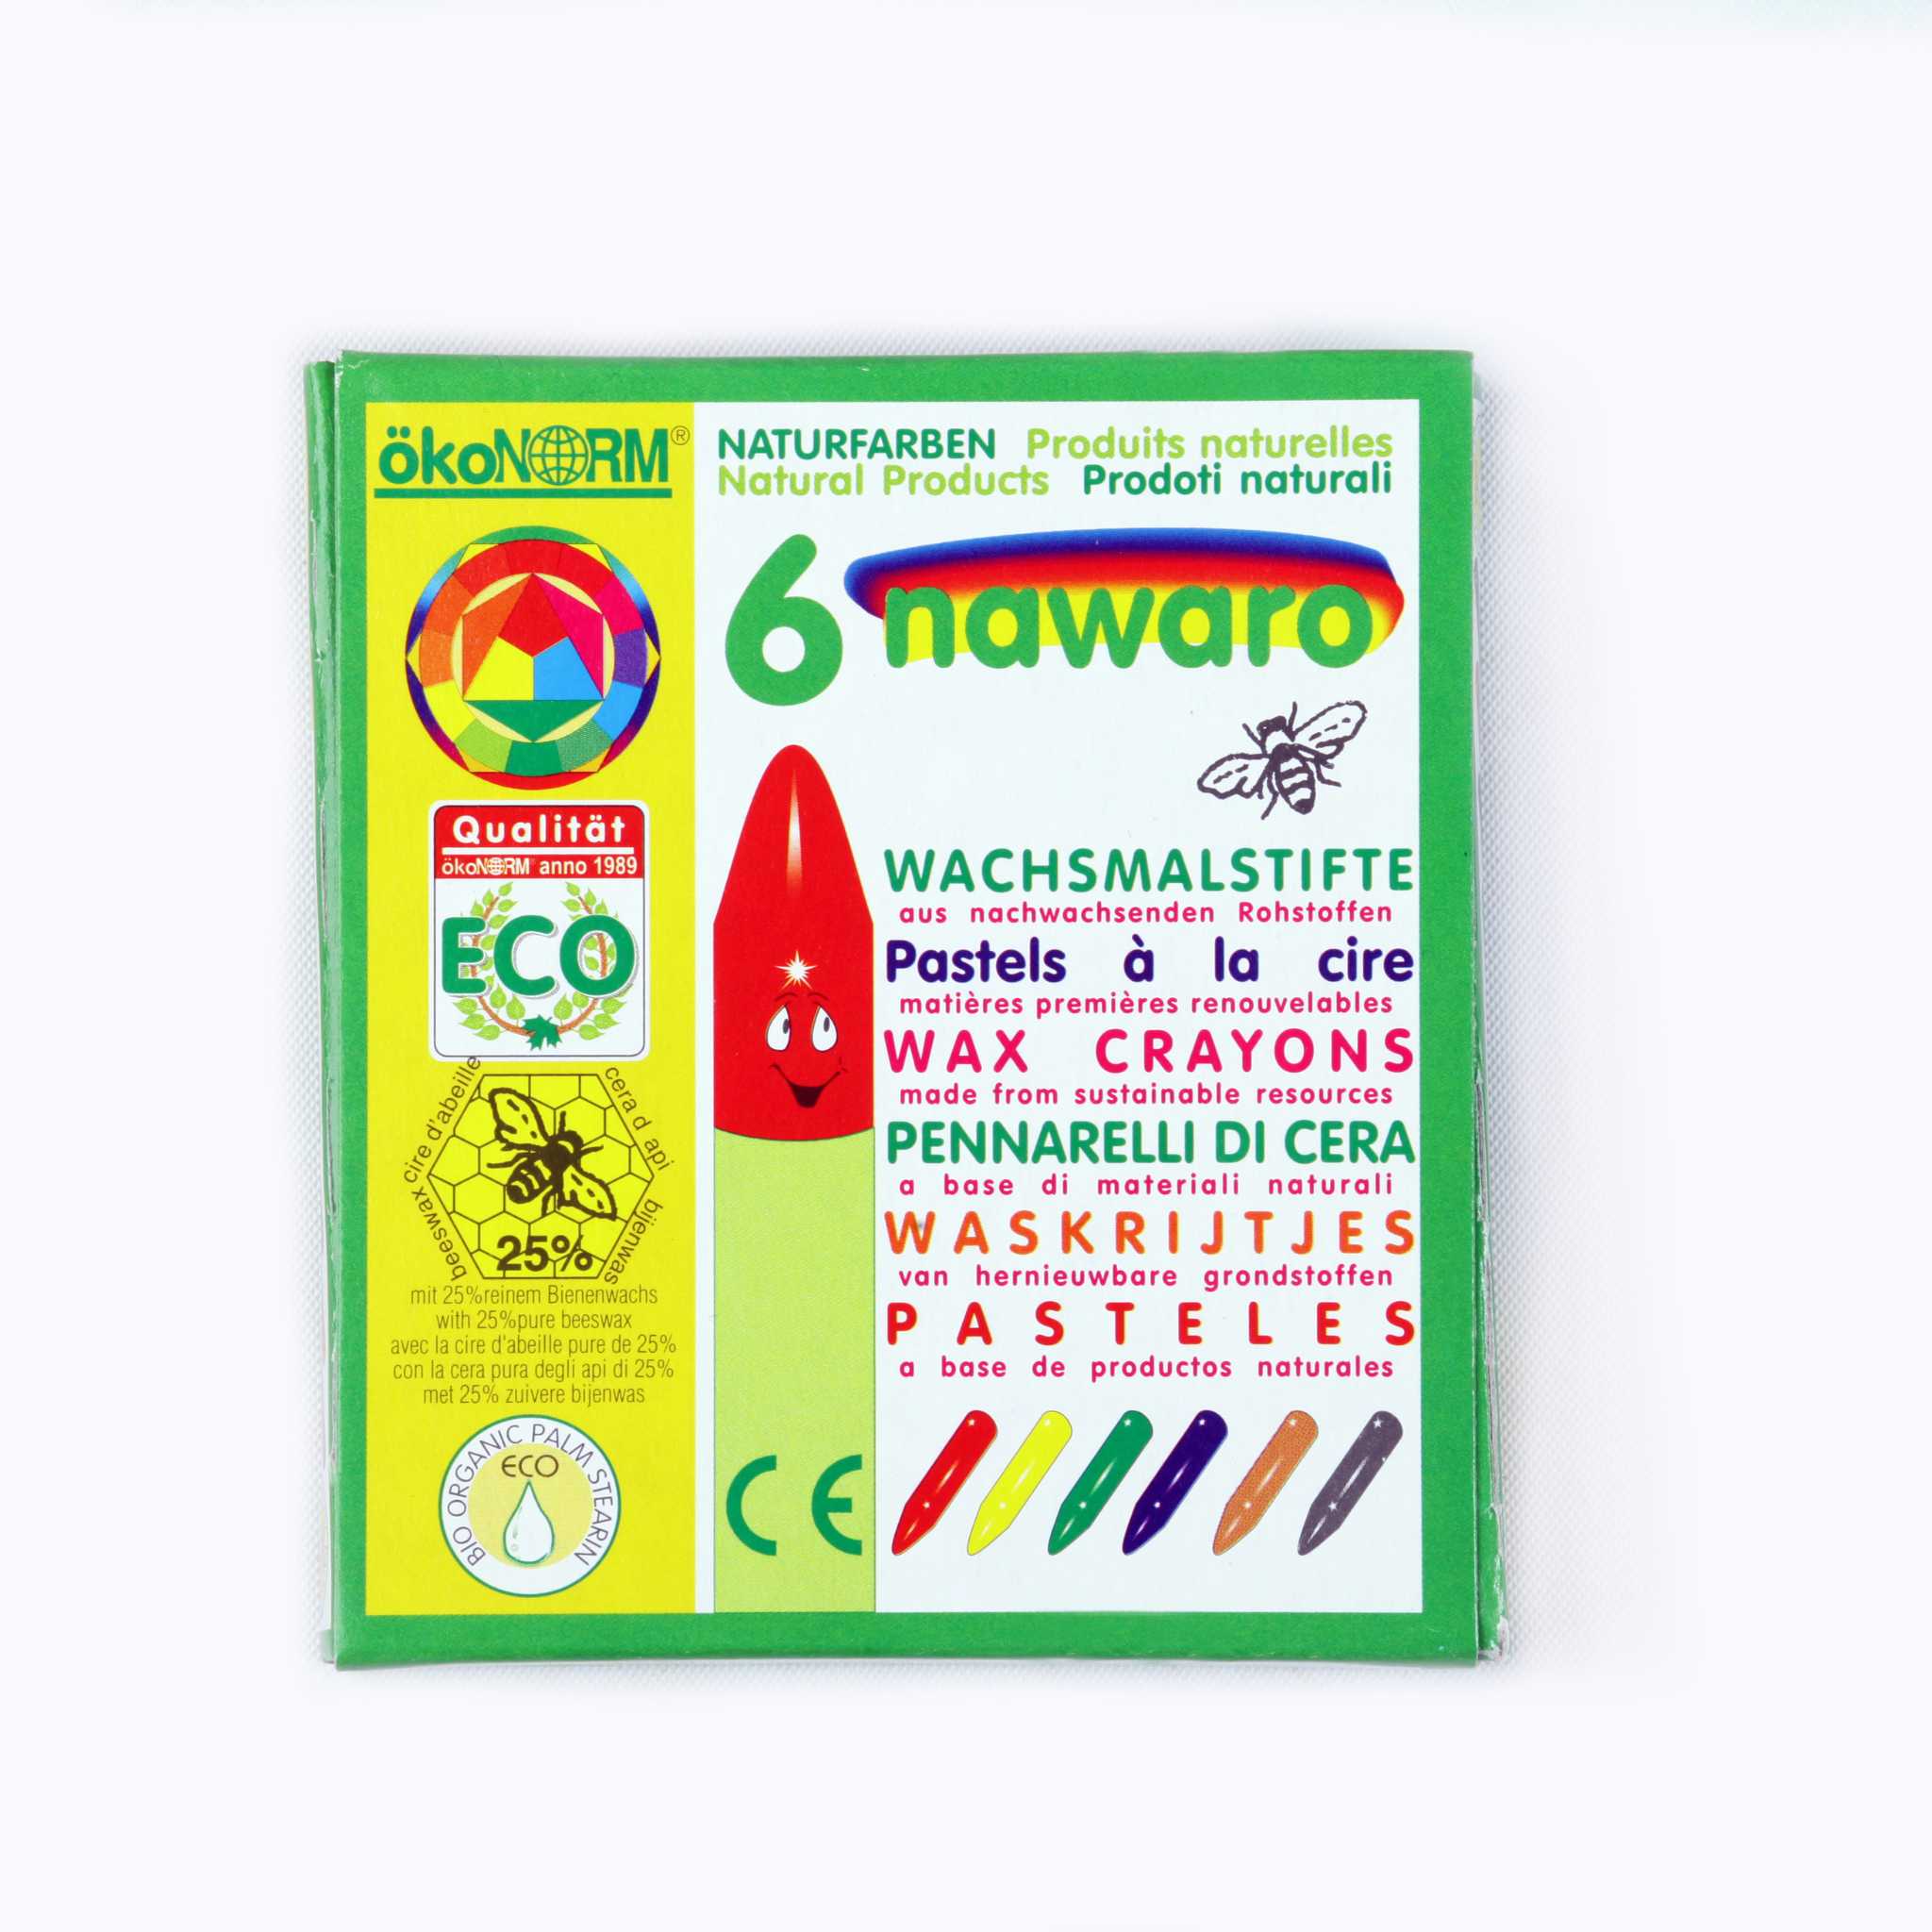 OkoNORM Wax Crayons 6 Pieces Packaging